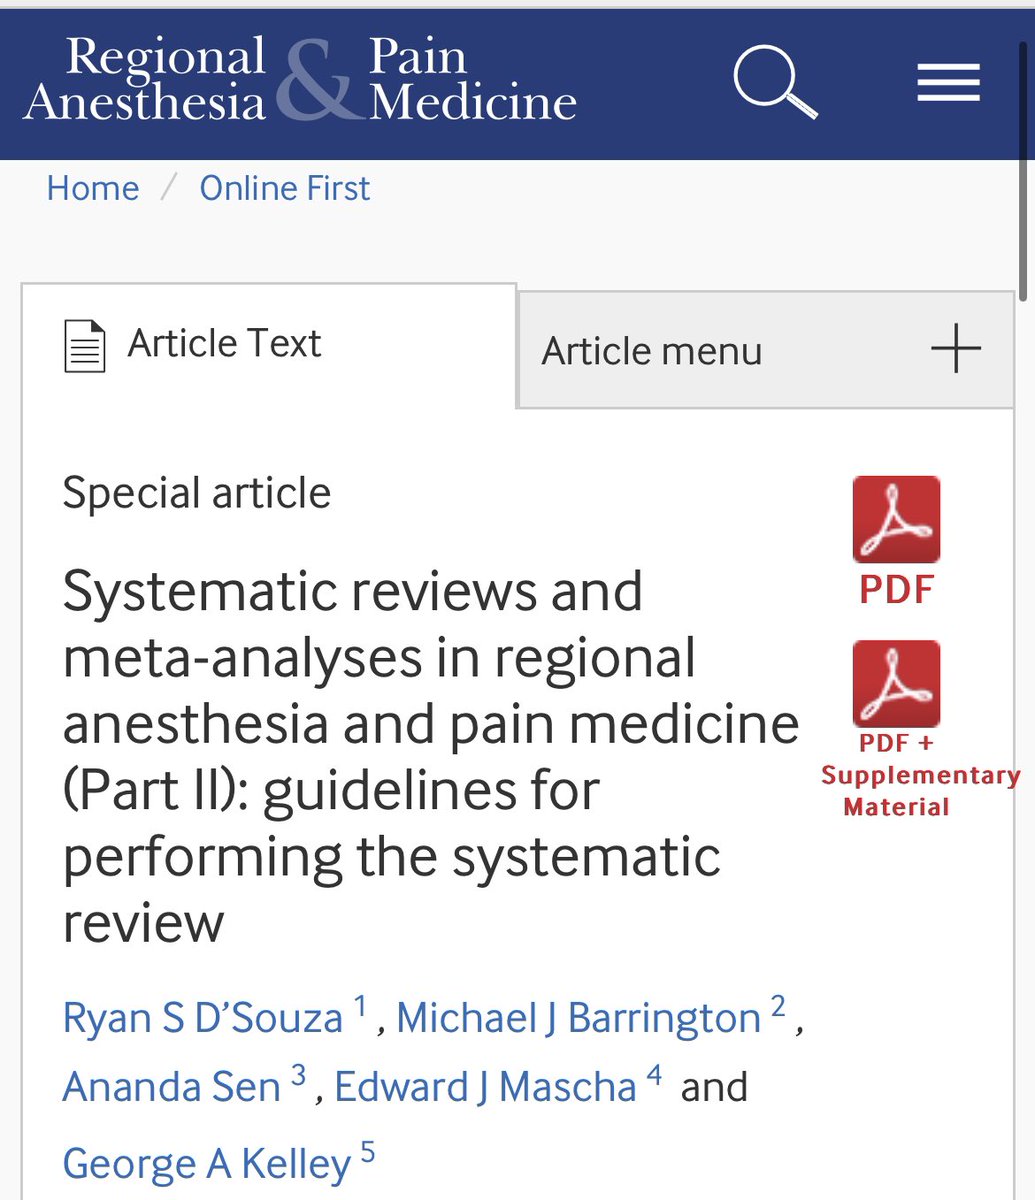 📝 Part 2 helps authors navigate the intricate process of writing a systematic review/meta-analysis. 📘 Link to Part 2 @RAPMOnline: rapm.bmj.com/content/early/… Link to Part 2 @IARS_Journals: journals.lww.com/anesthesia-ana… @sites_brian @ASRA_Society @nasir418 @JayKarriMD @MayoAnesthesia